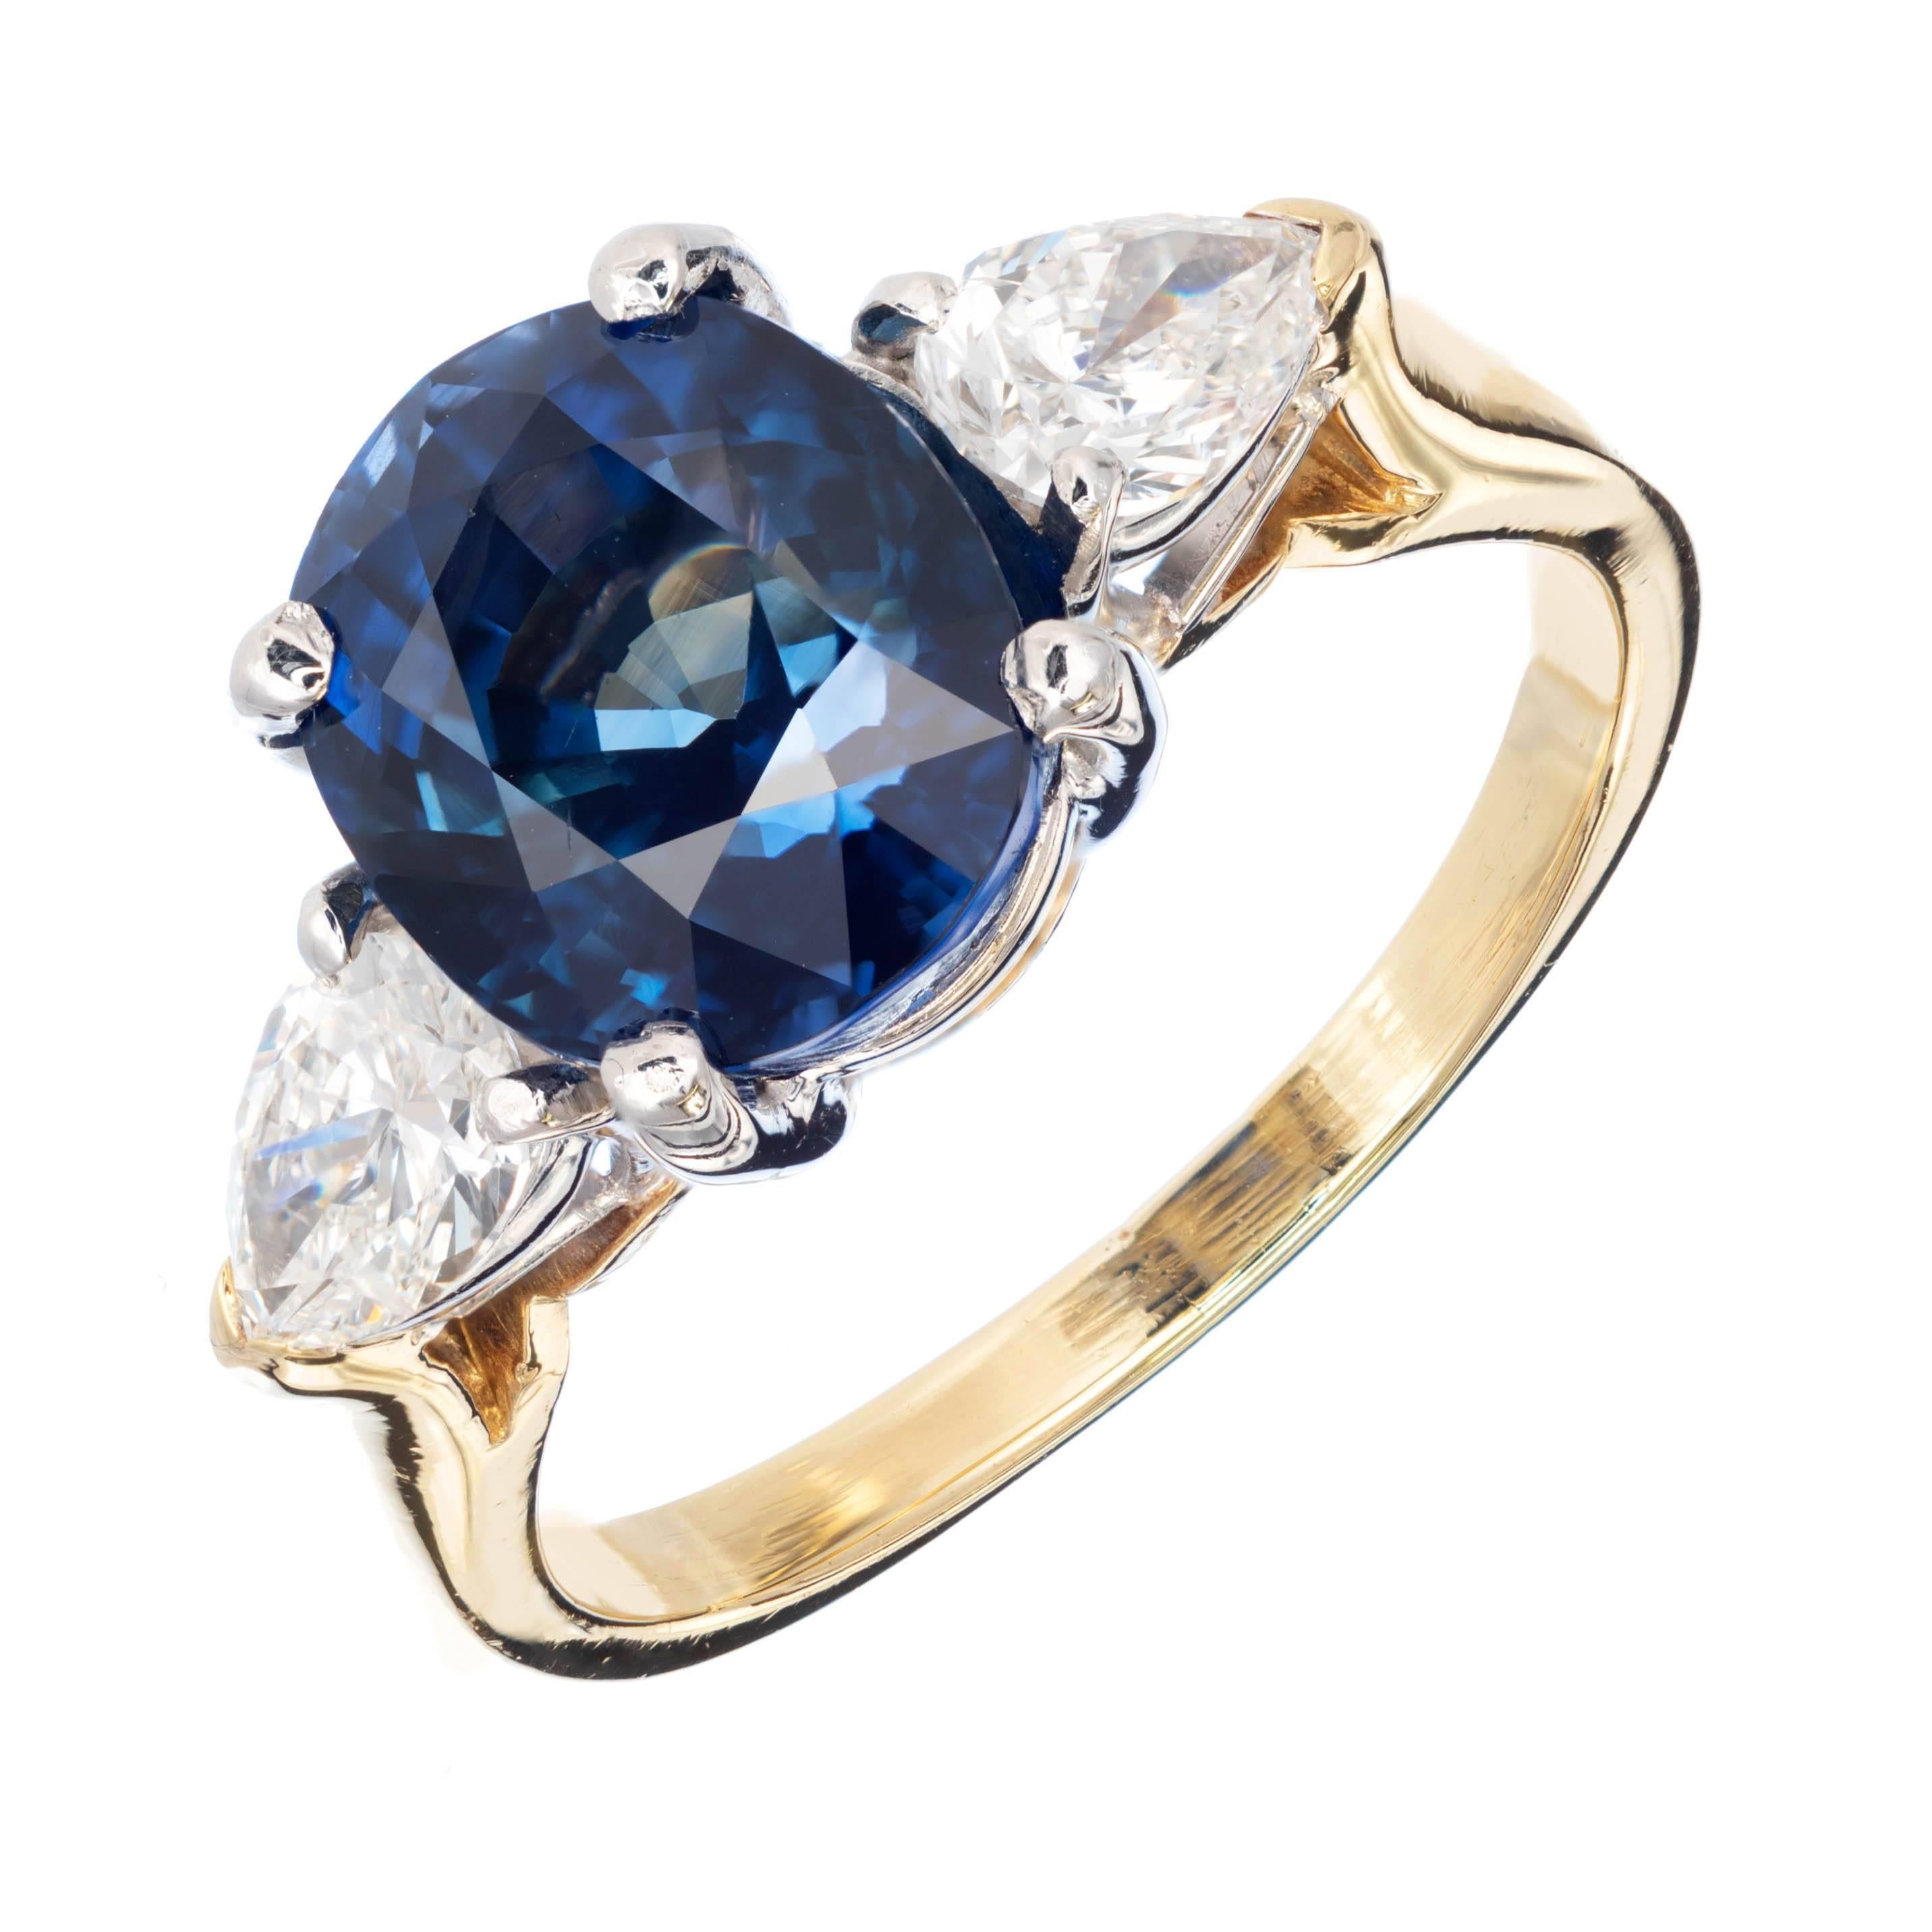 4.53 Carat Natural Sapphire Pear Shaped Diamond Gold Platinum Engagement Ring For Sale